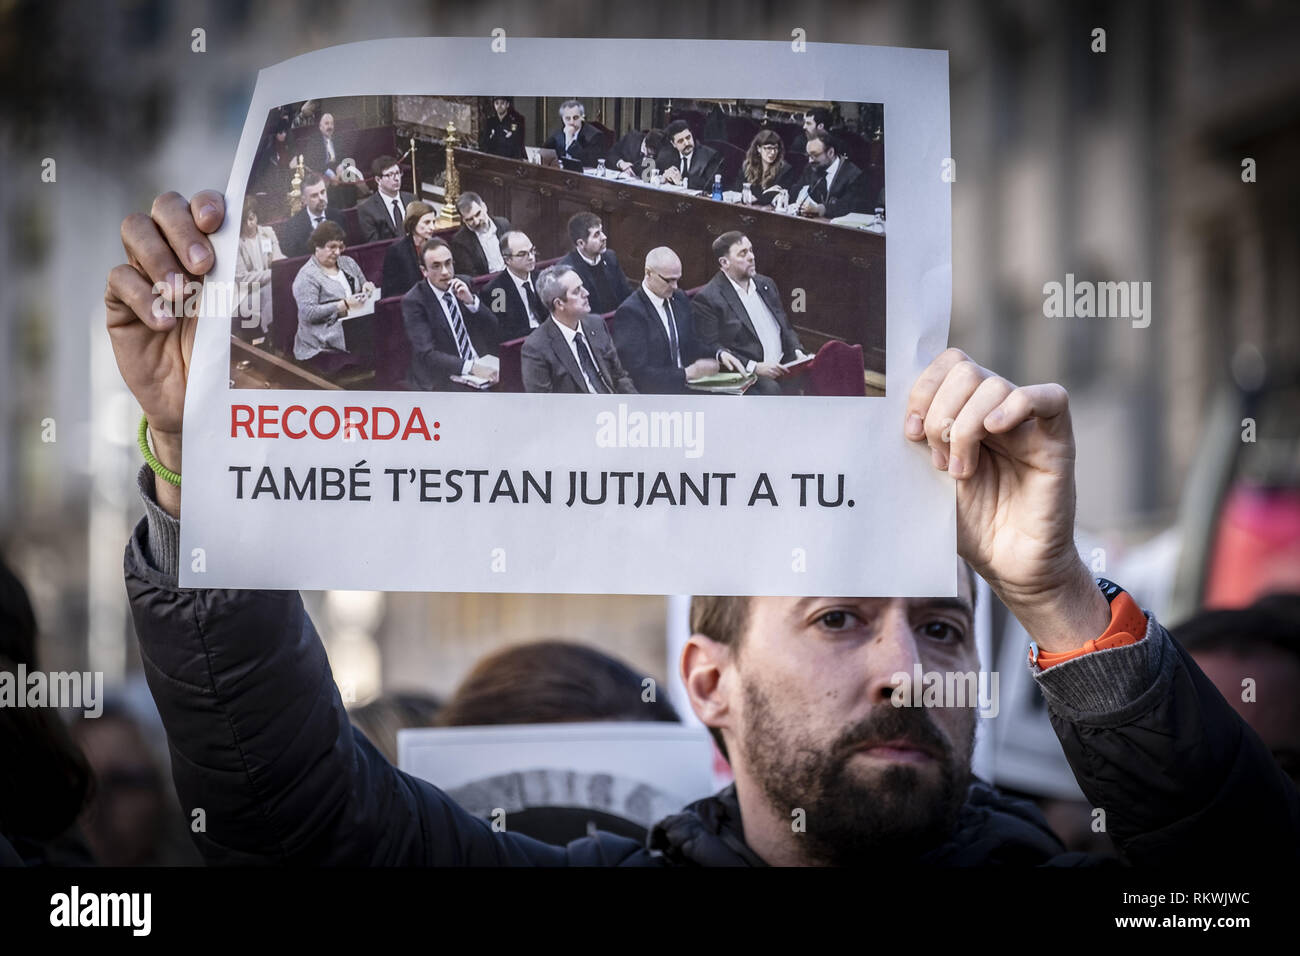 Barcelona, Catalonia, Spain. 12th Feb, 2019. A worker from the Department of Economy and Finance is seen during the protest showing an image taken from TV showing the first portrait image of the political prisoners since they were arrested.Hundreds of workers and officials of the General office of Catalonia have gone out to show their solidarity with political prisoners on their first day of trial. The workers of the Department of Economy have blocked the traffic of the Gran VÃ-a during the protest. Credit: Paco Freire/SOPA Images/ZUMA Wire/Alamy Live News Stock Photo